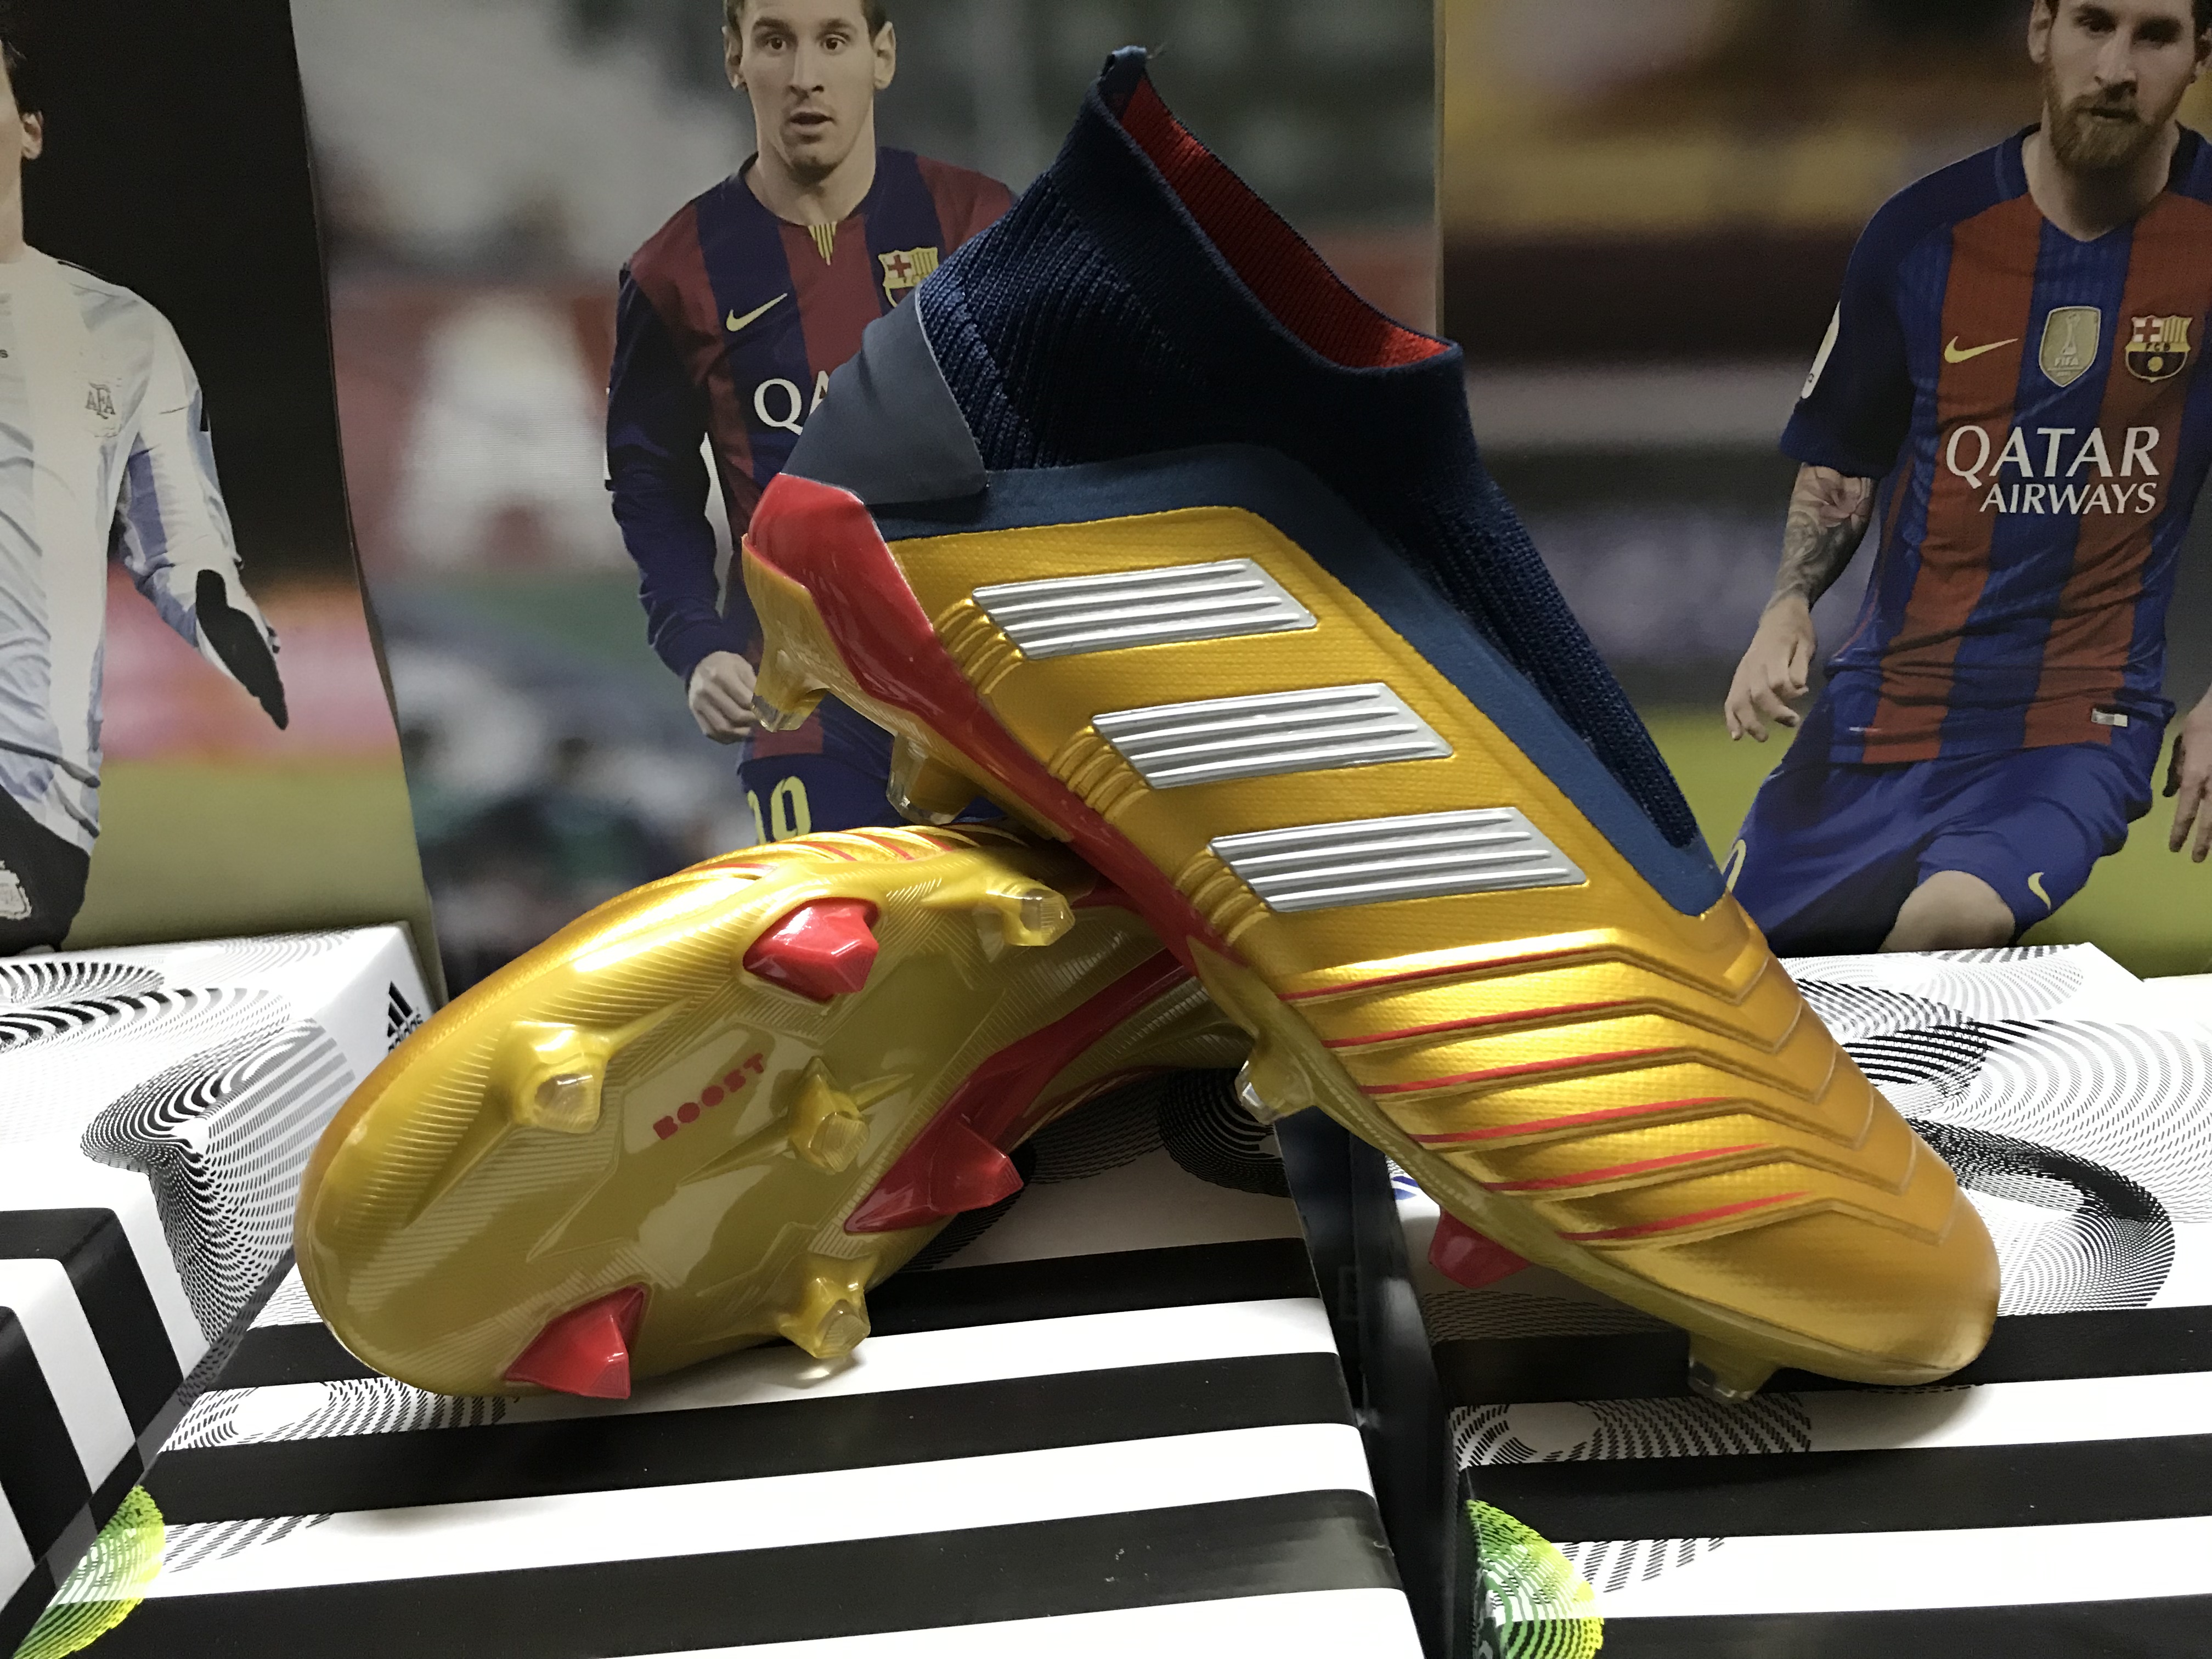 Adidas Predator 19+ FG 'Gold Navy' G27781 - Superior performance and style | Limited edition